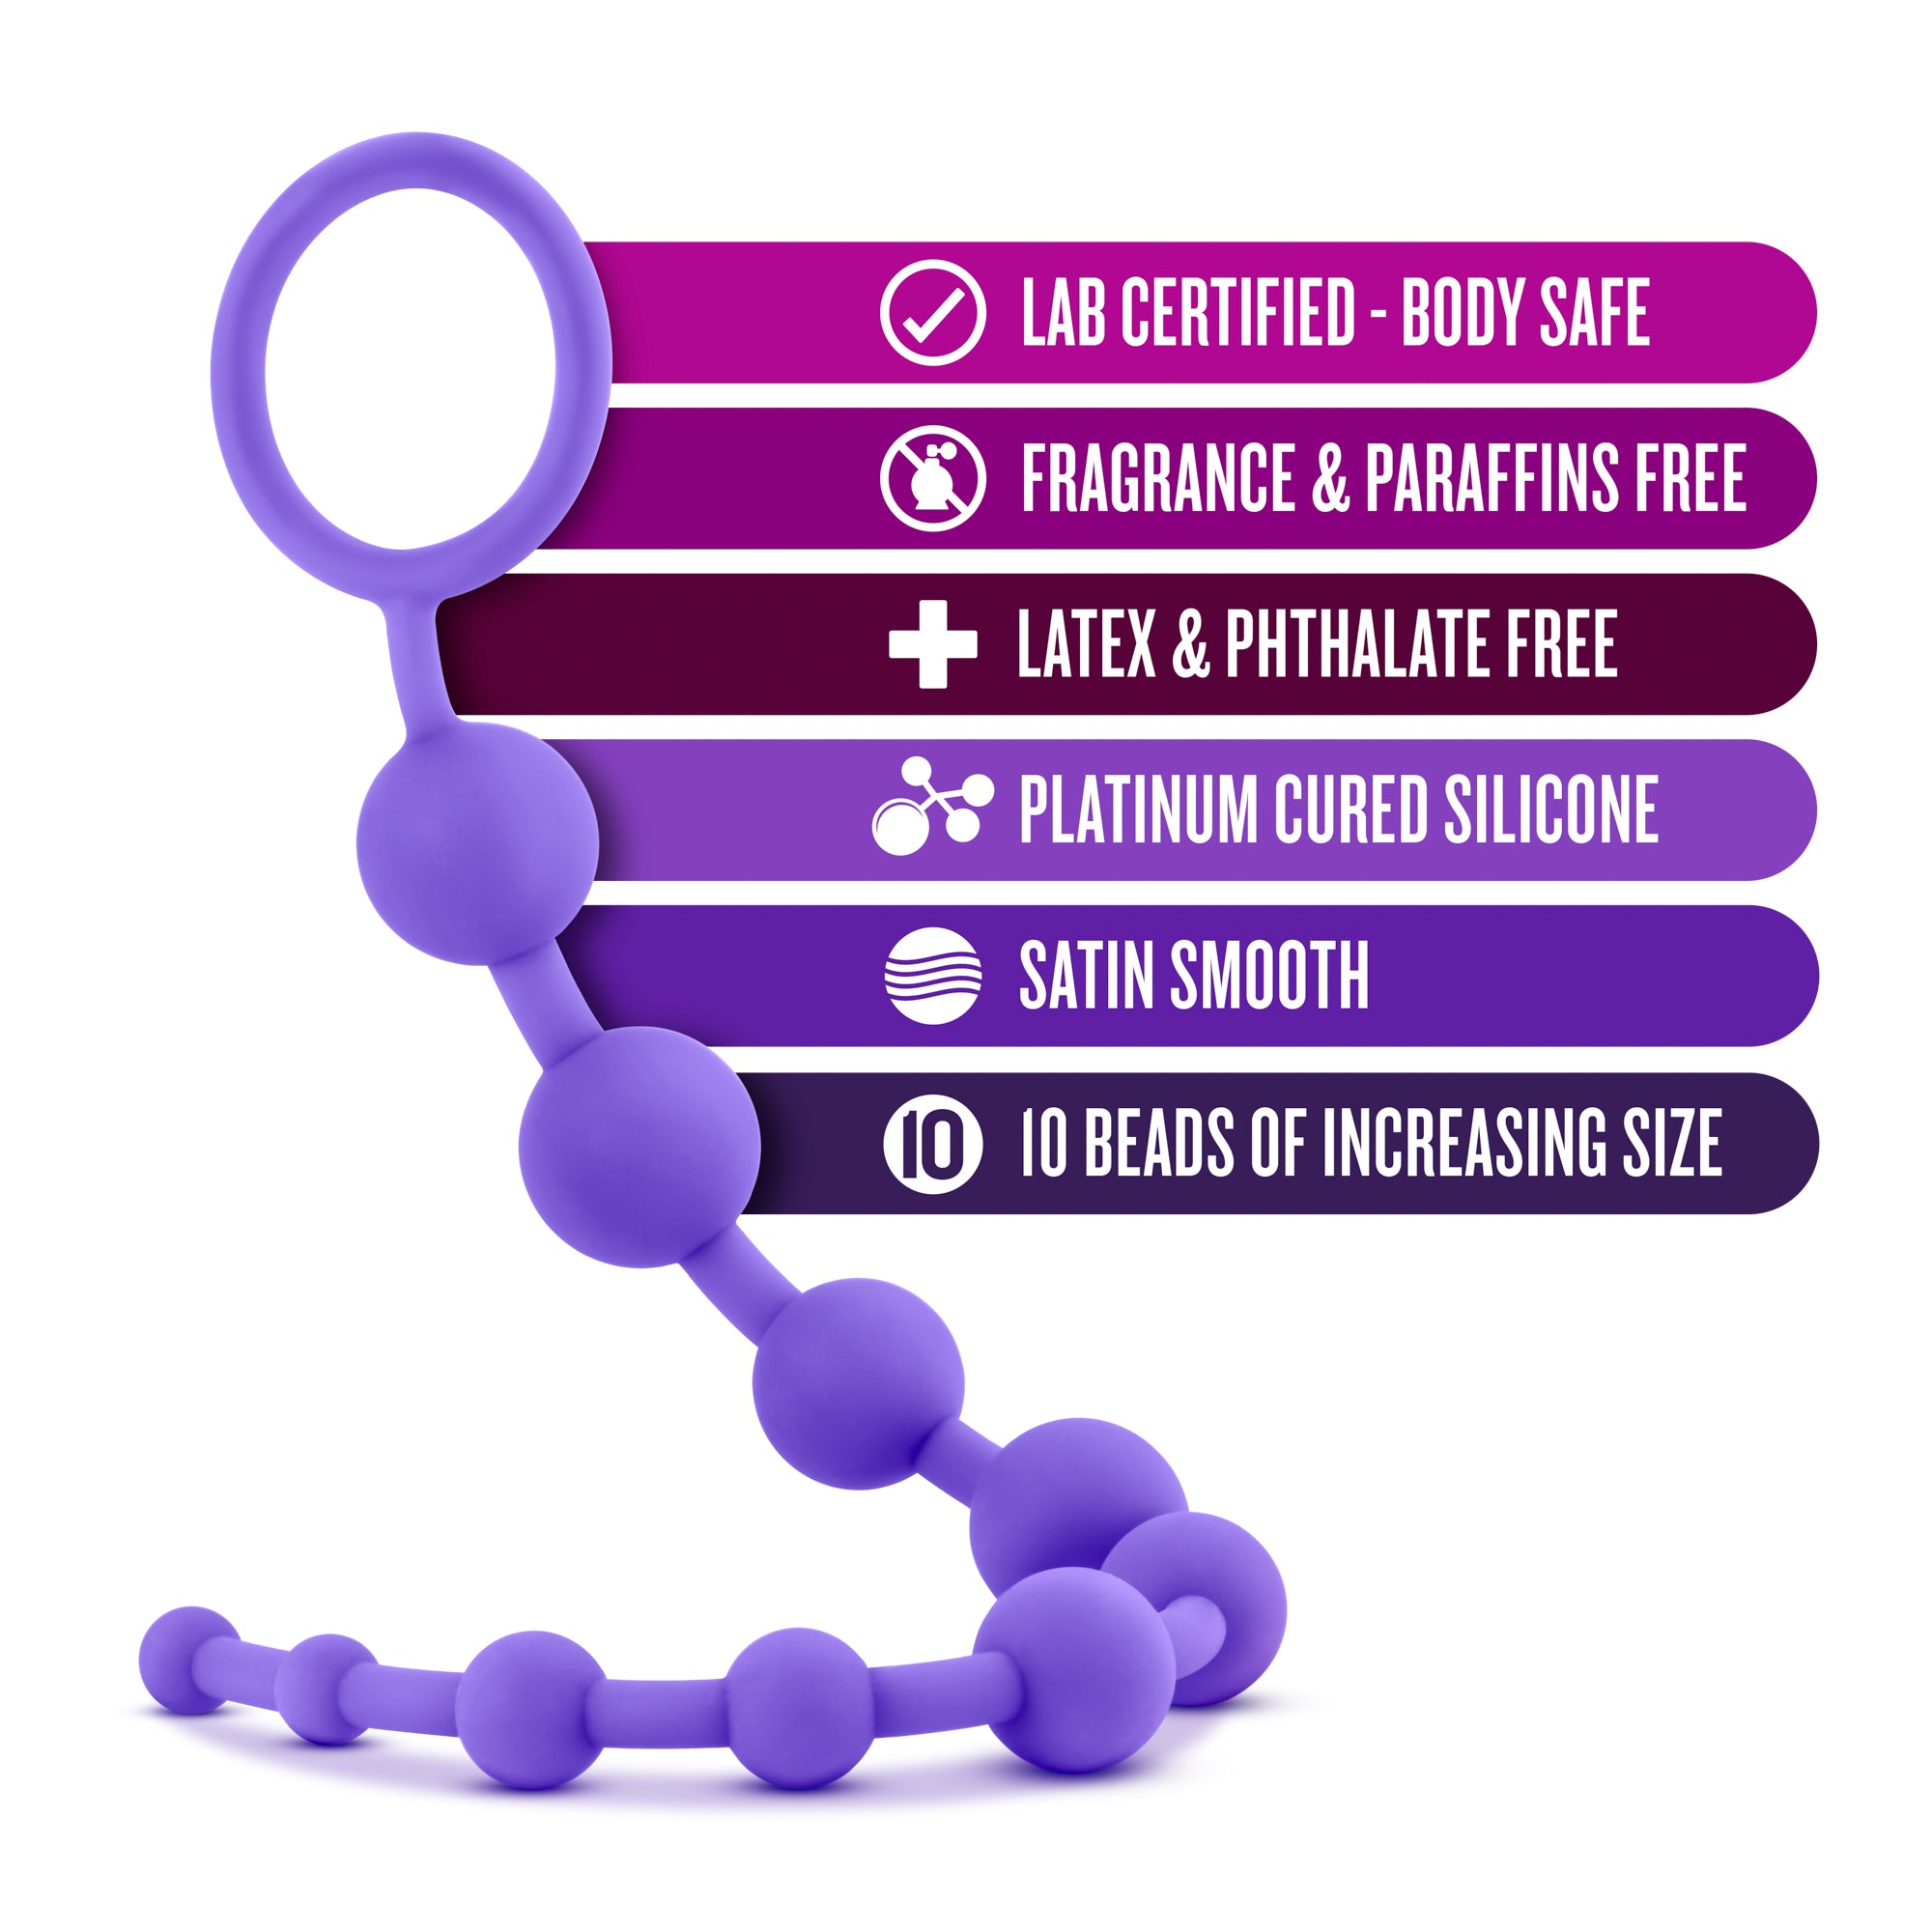 Image showing all benefits of beads: lab-certified-body safe, fragrance and paraffins free, latex & phthalate-free, platinum-cured silicone, satin smooth, 10 beads of increasing size